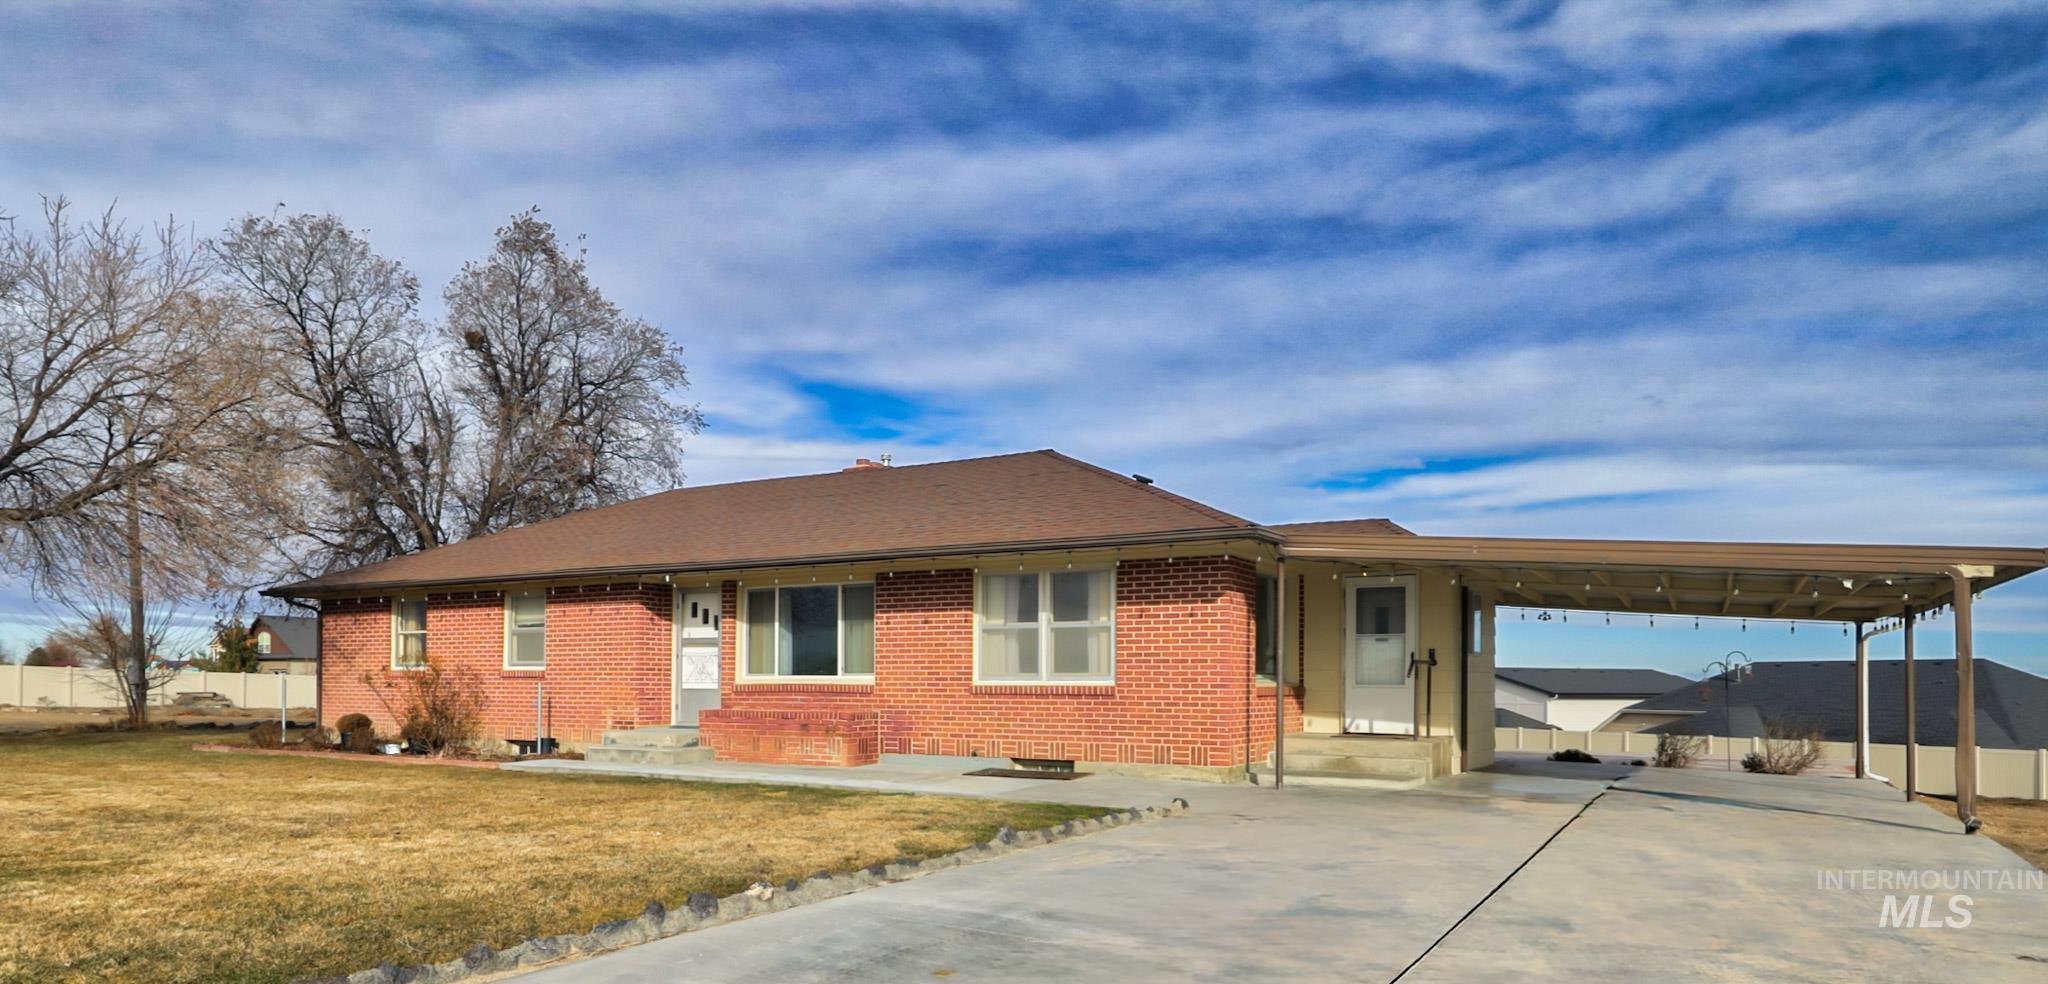 11652 Lake Lowell Ave., Nampa, Idaho 83686, 5 Bedrooms, Business/Commercial For Sale, Price $825,000,MLS 98902458